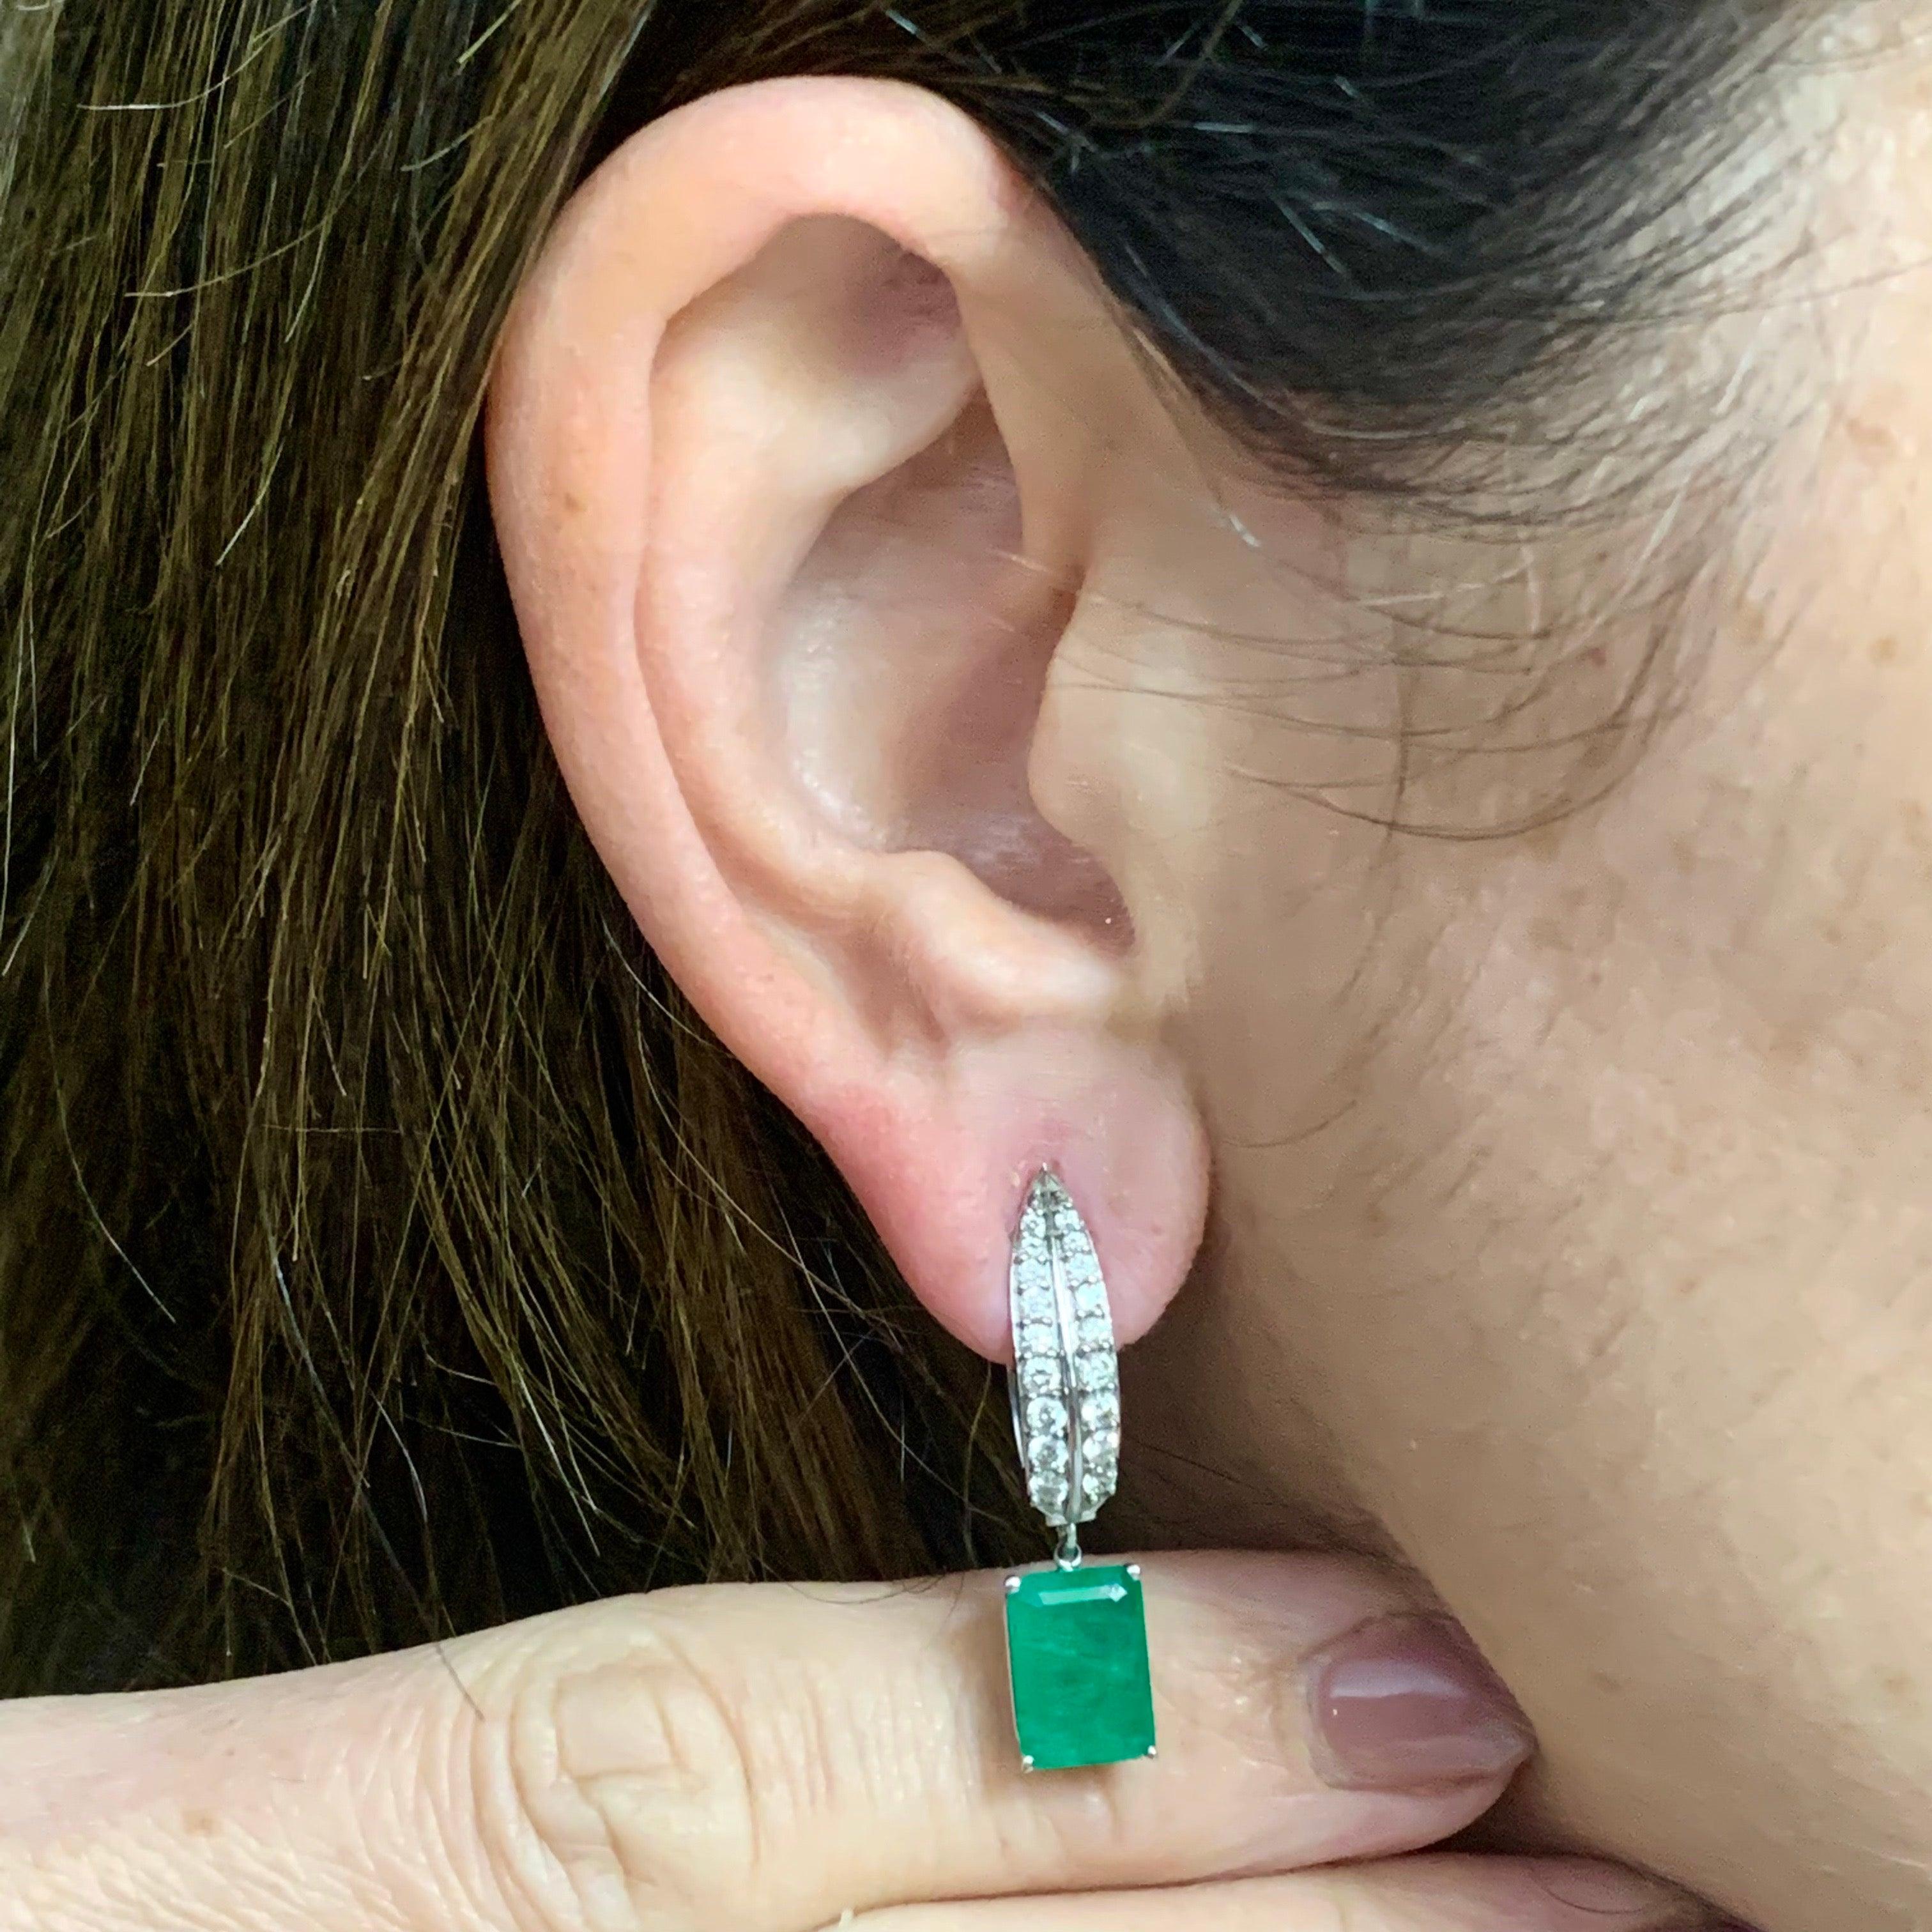 Natural Finely Faceted Quality Emerald Diamond Earrings 4.74 TCW 14k White Gold Certified $7,250 018693

This is one of Kind Unique Custom Made Glamorous Piece of Jewelry!

Nothing says, “I Love you” more than Diamonds and Pearls!

This item has